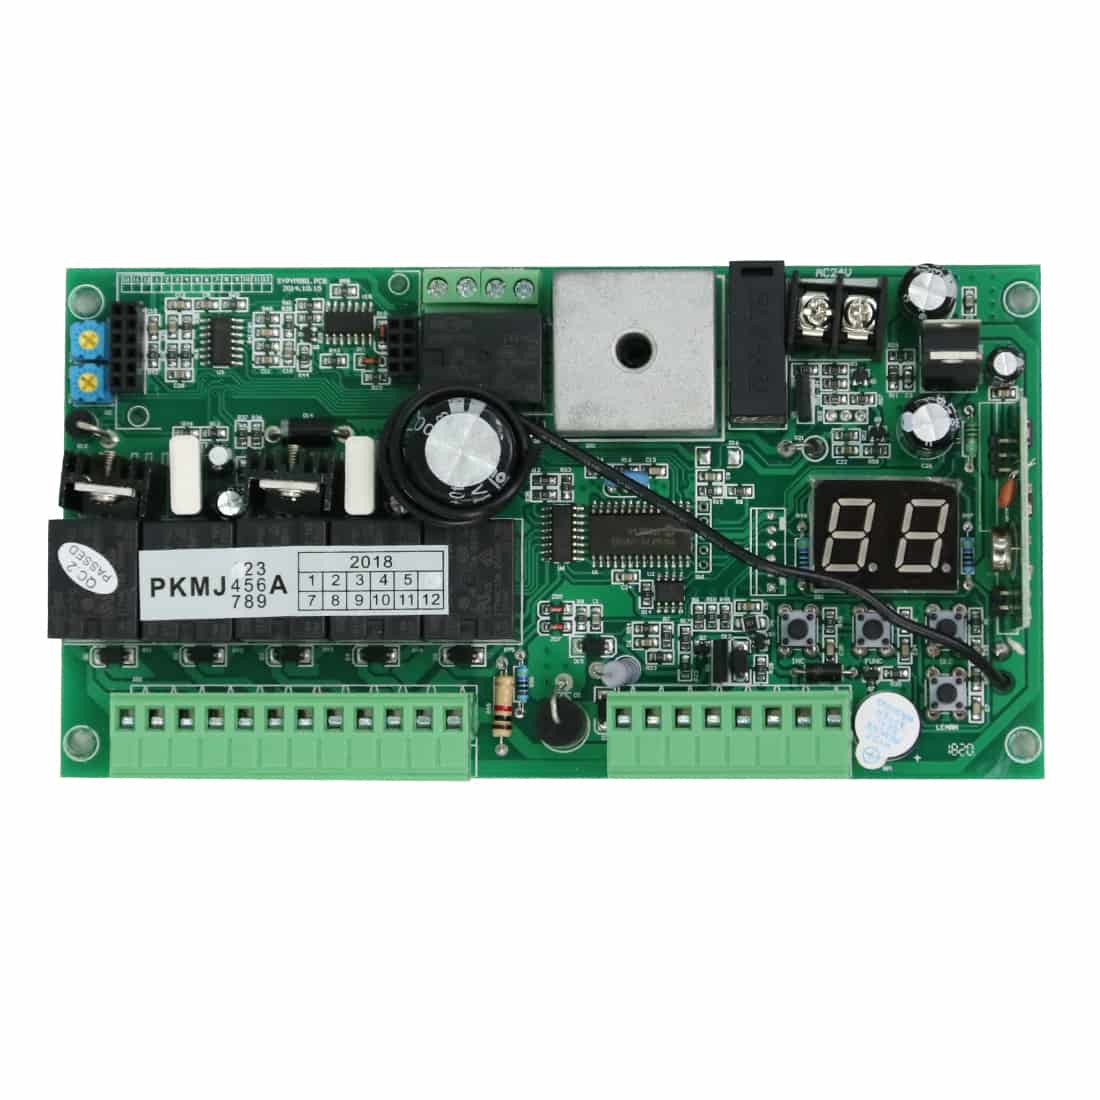 PKMJ1A PCB Print Circuit Control Board for AT602 AT1202 Swing Gate Openers